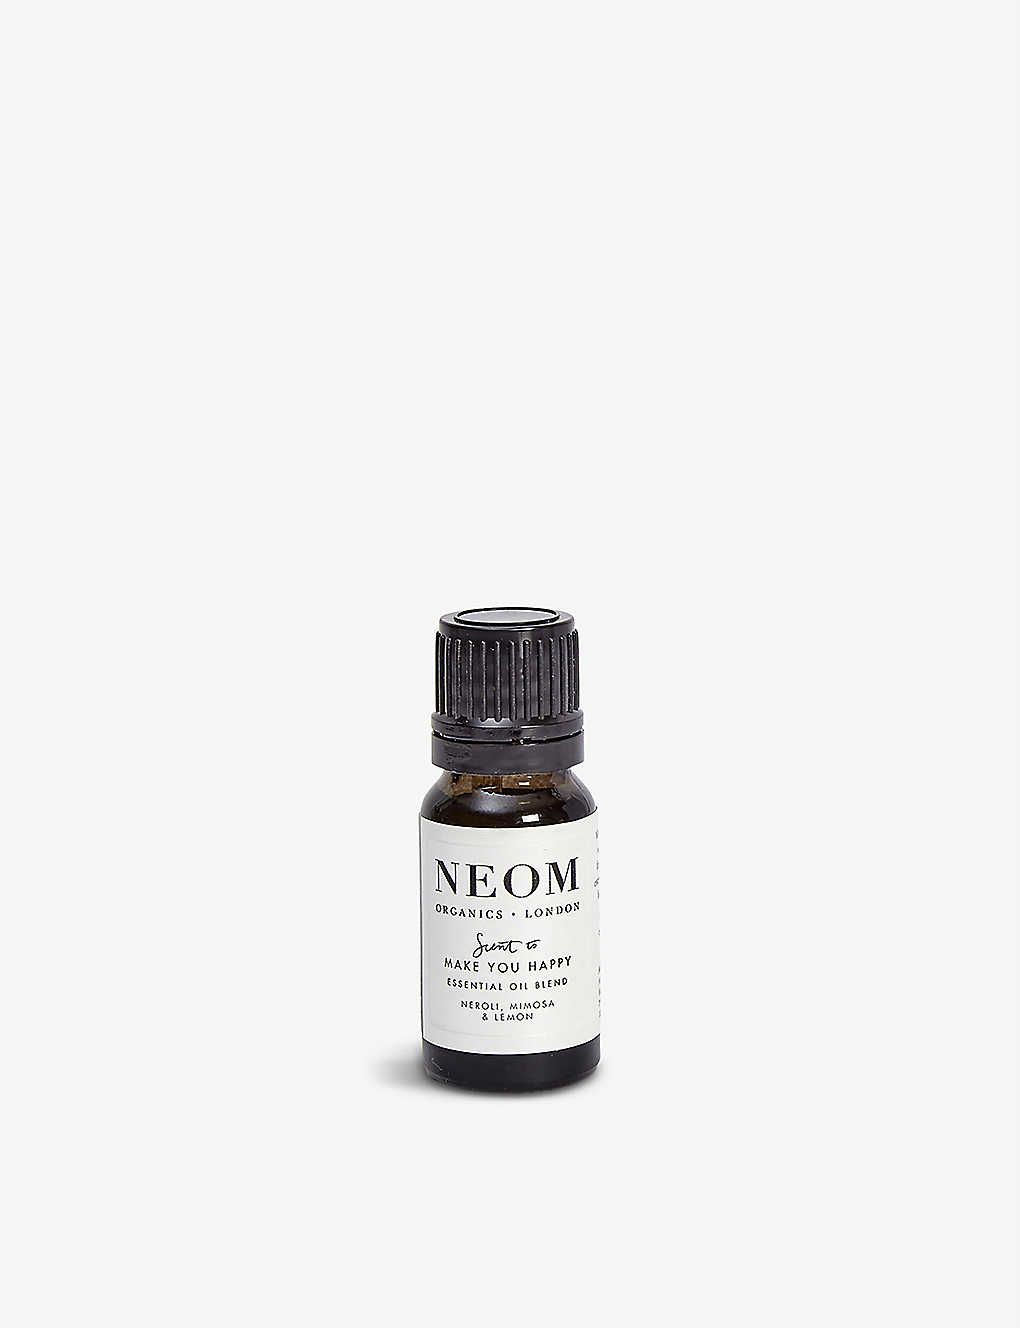 Scent to Make You Happy essential oil blend 10ml | Selfridges